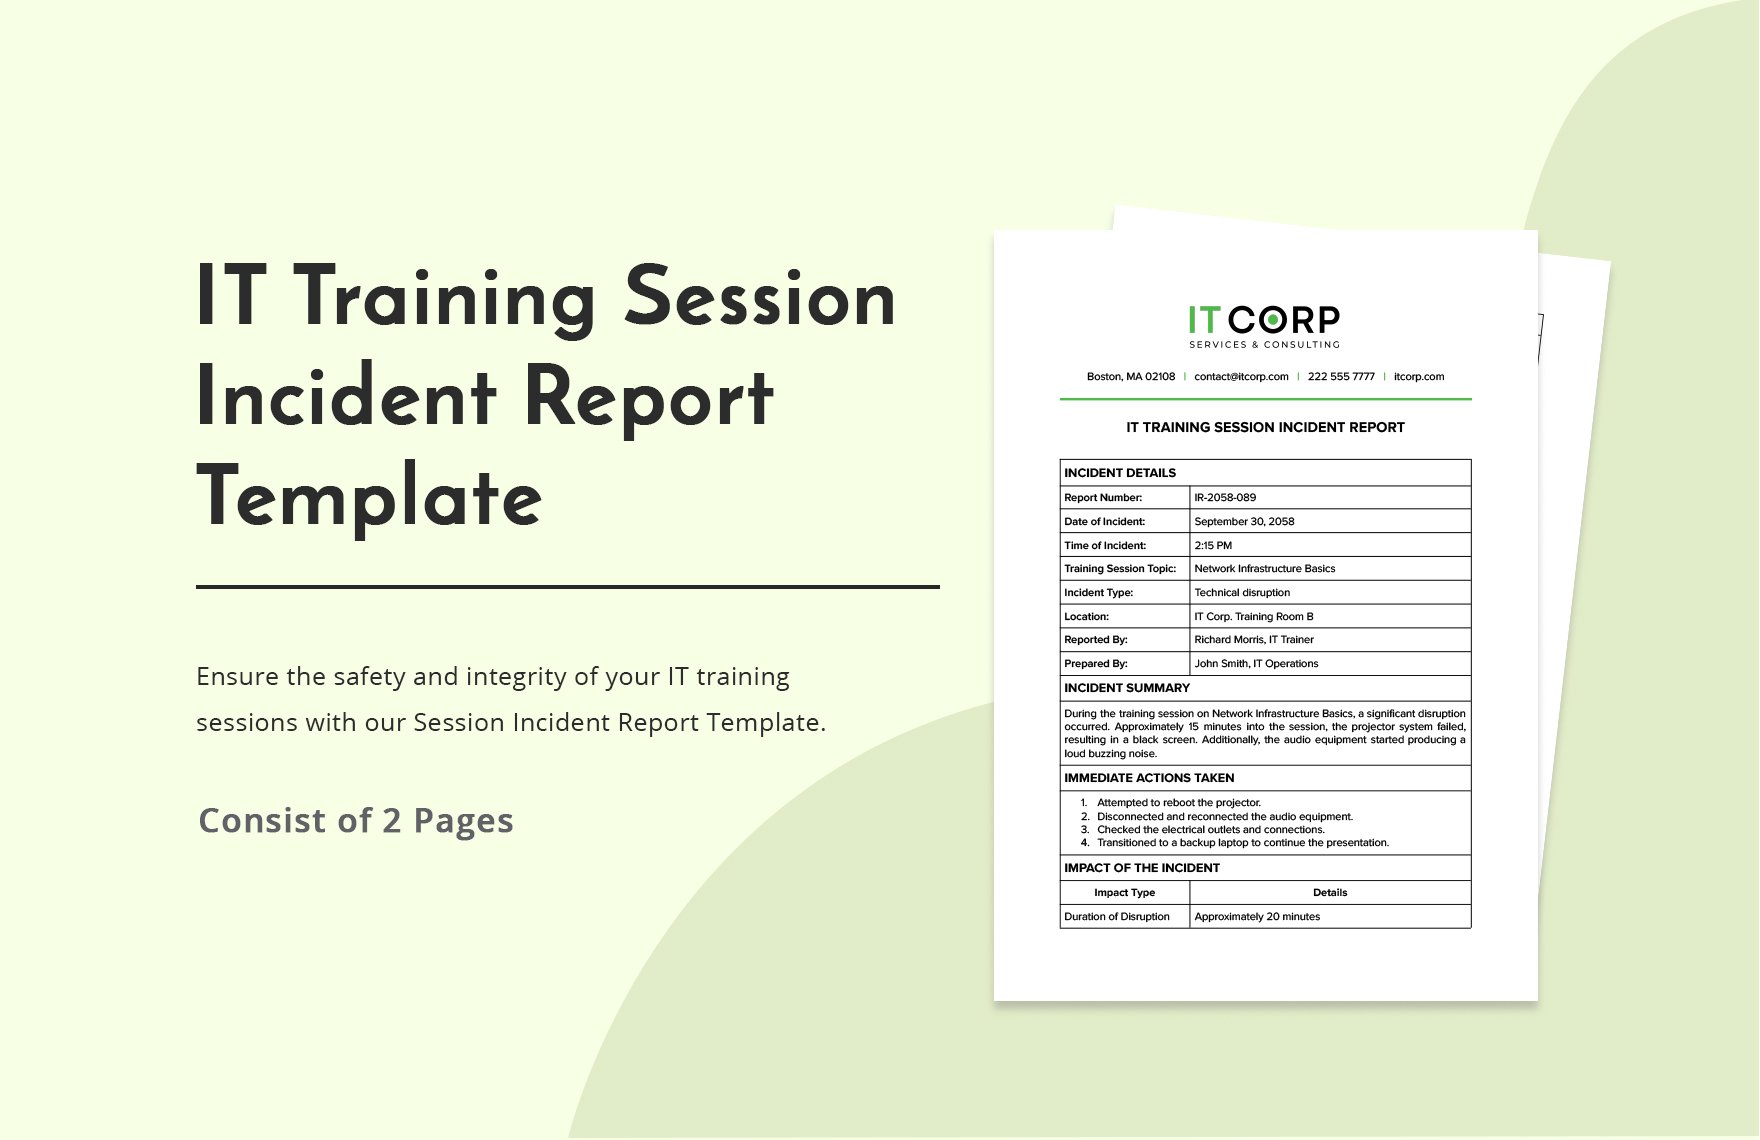 IT Training Session Incident Report Template